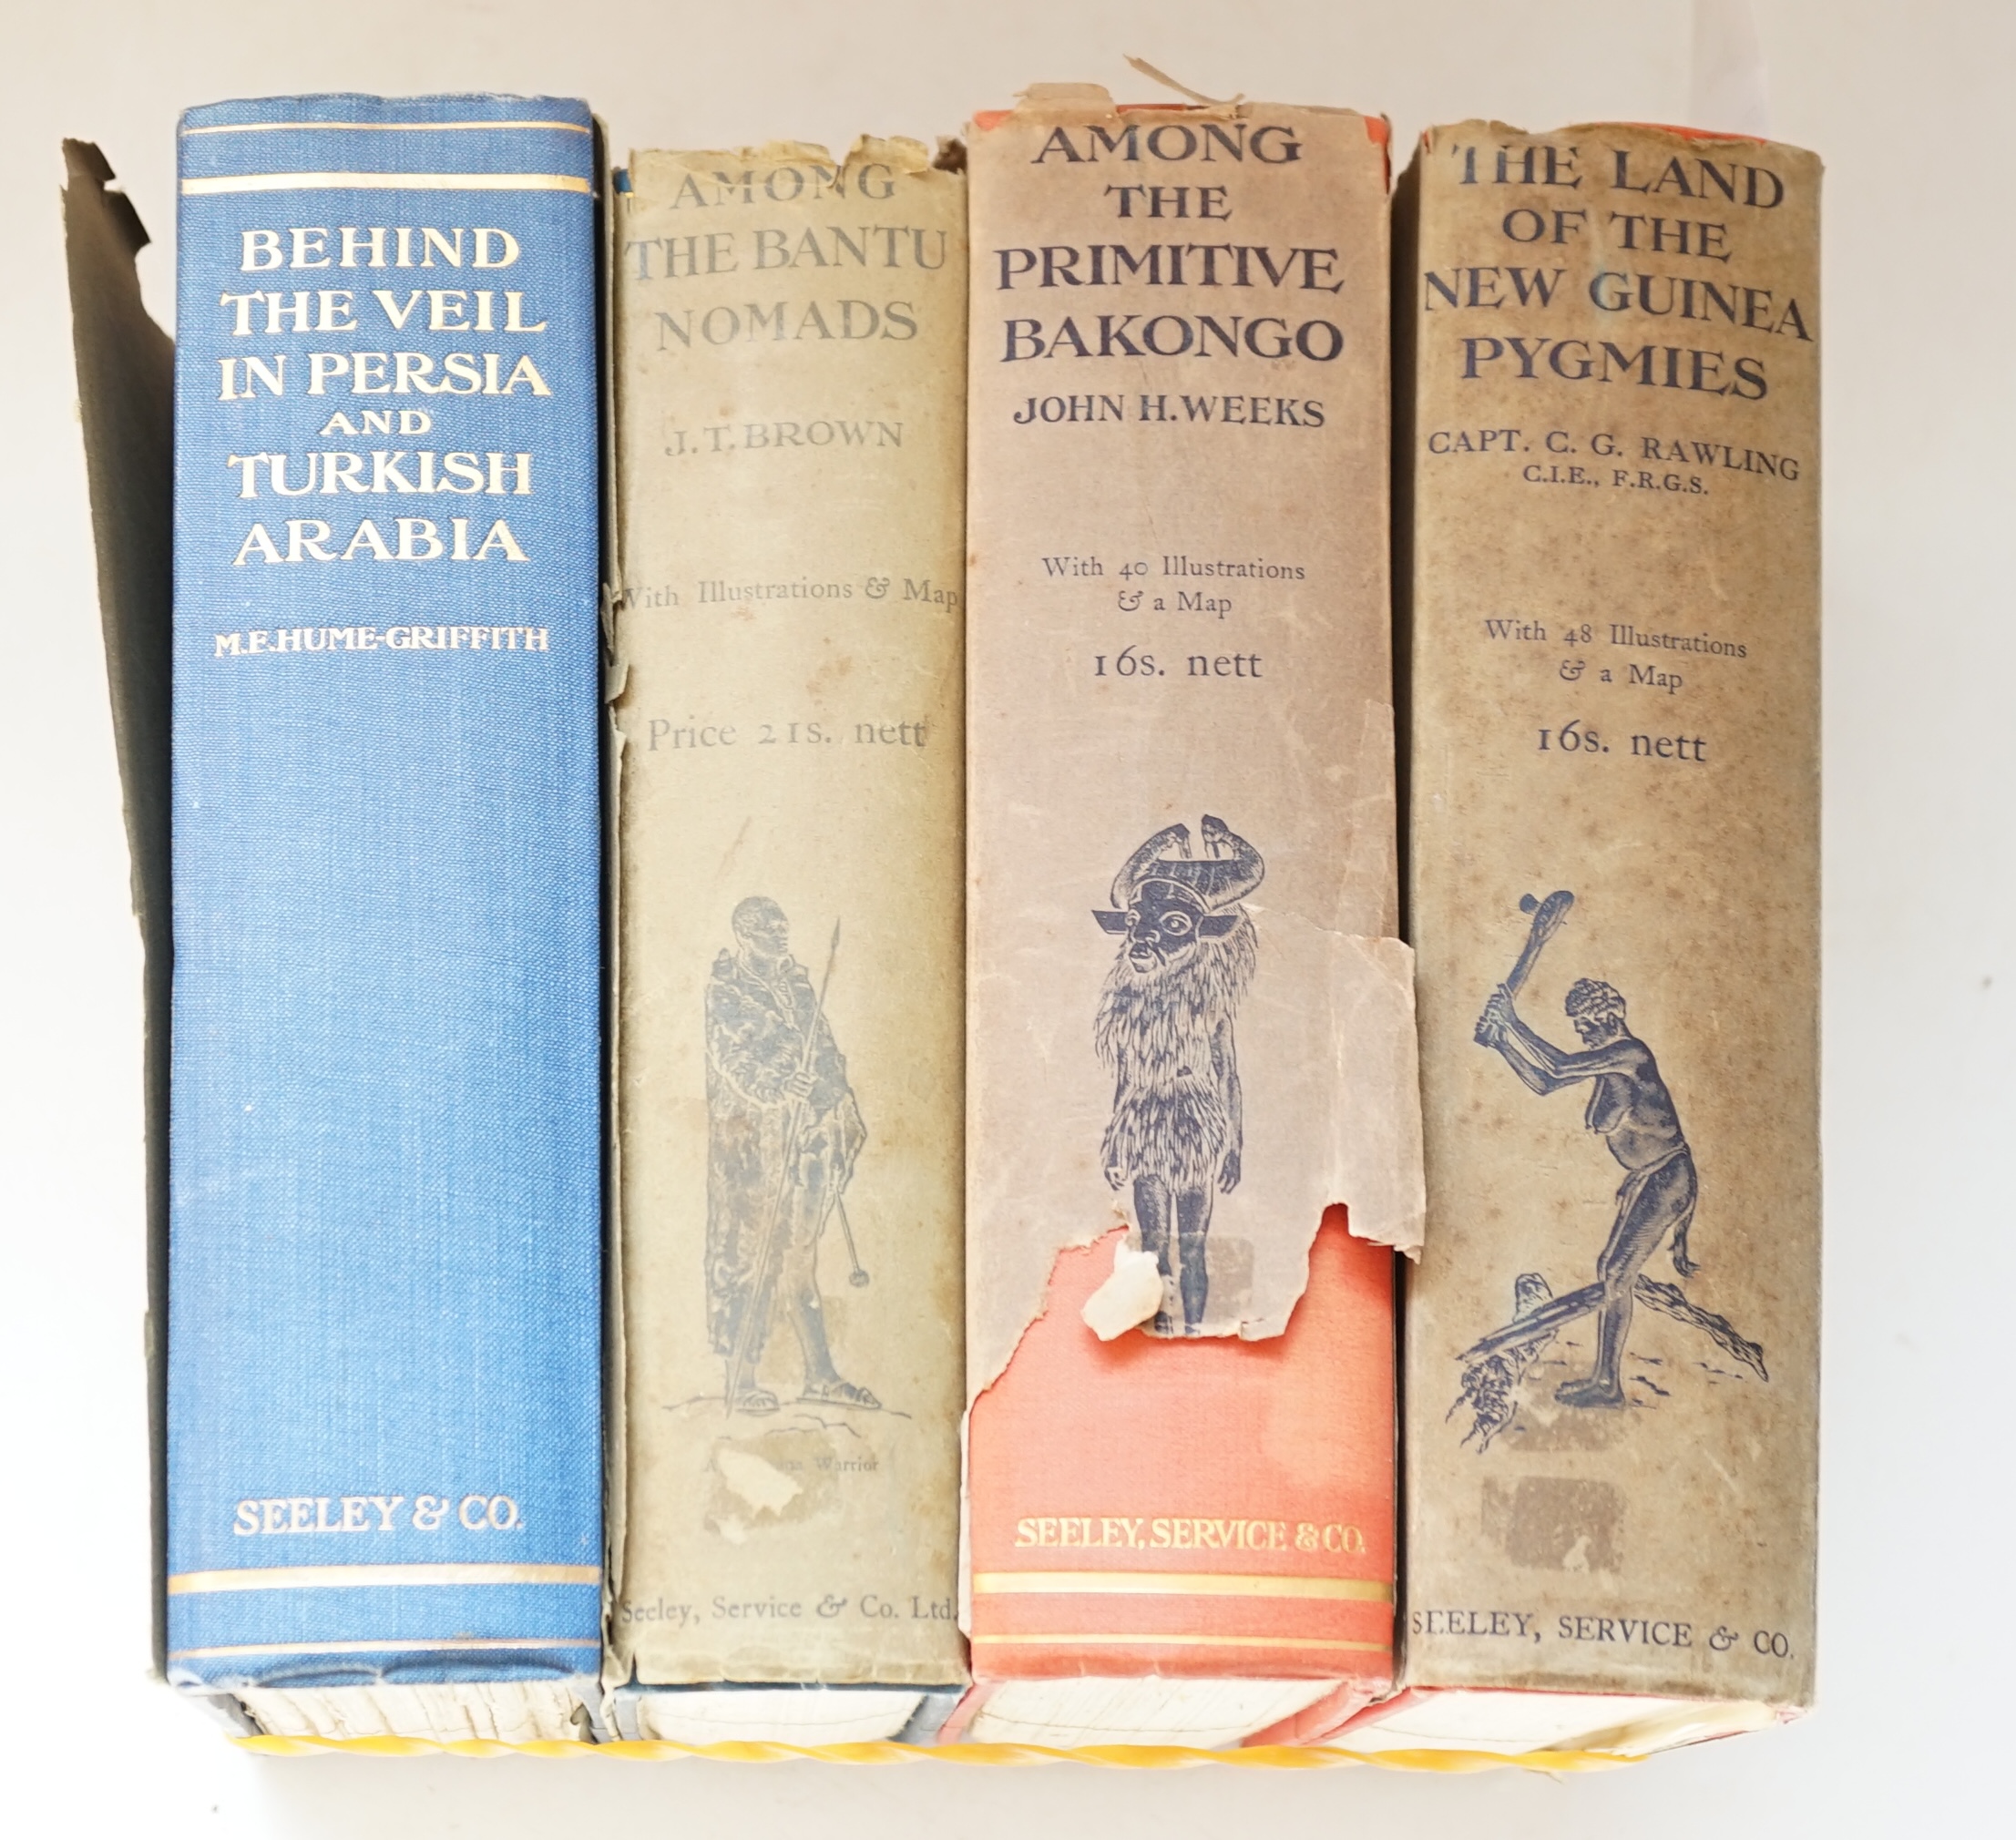 Rawling, Captain C.G - The Land of the New Guinea Pygmies. An Account of a Story of a Pioneer Journey of Exploration into the Heart of New Guinea, 1st ed., 8vo, original cloth, with d/j, with black and white illustration